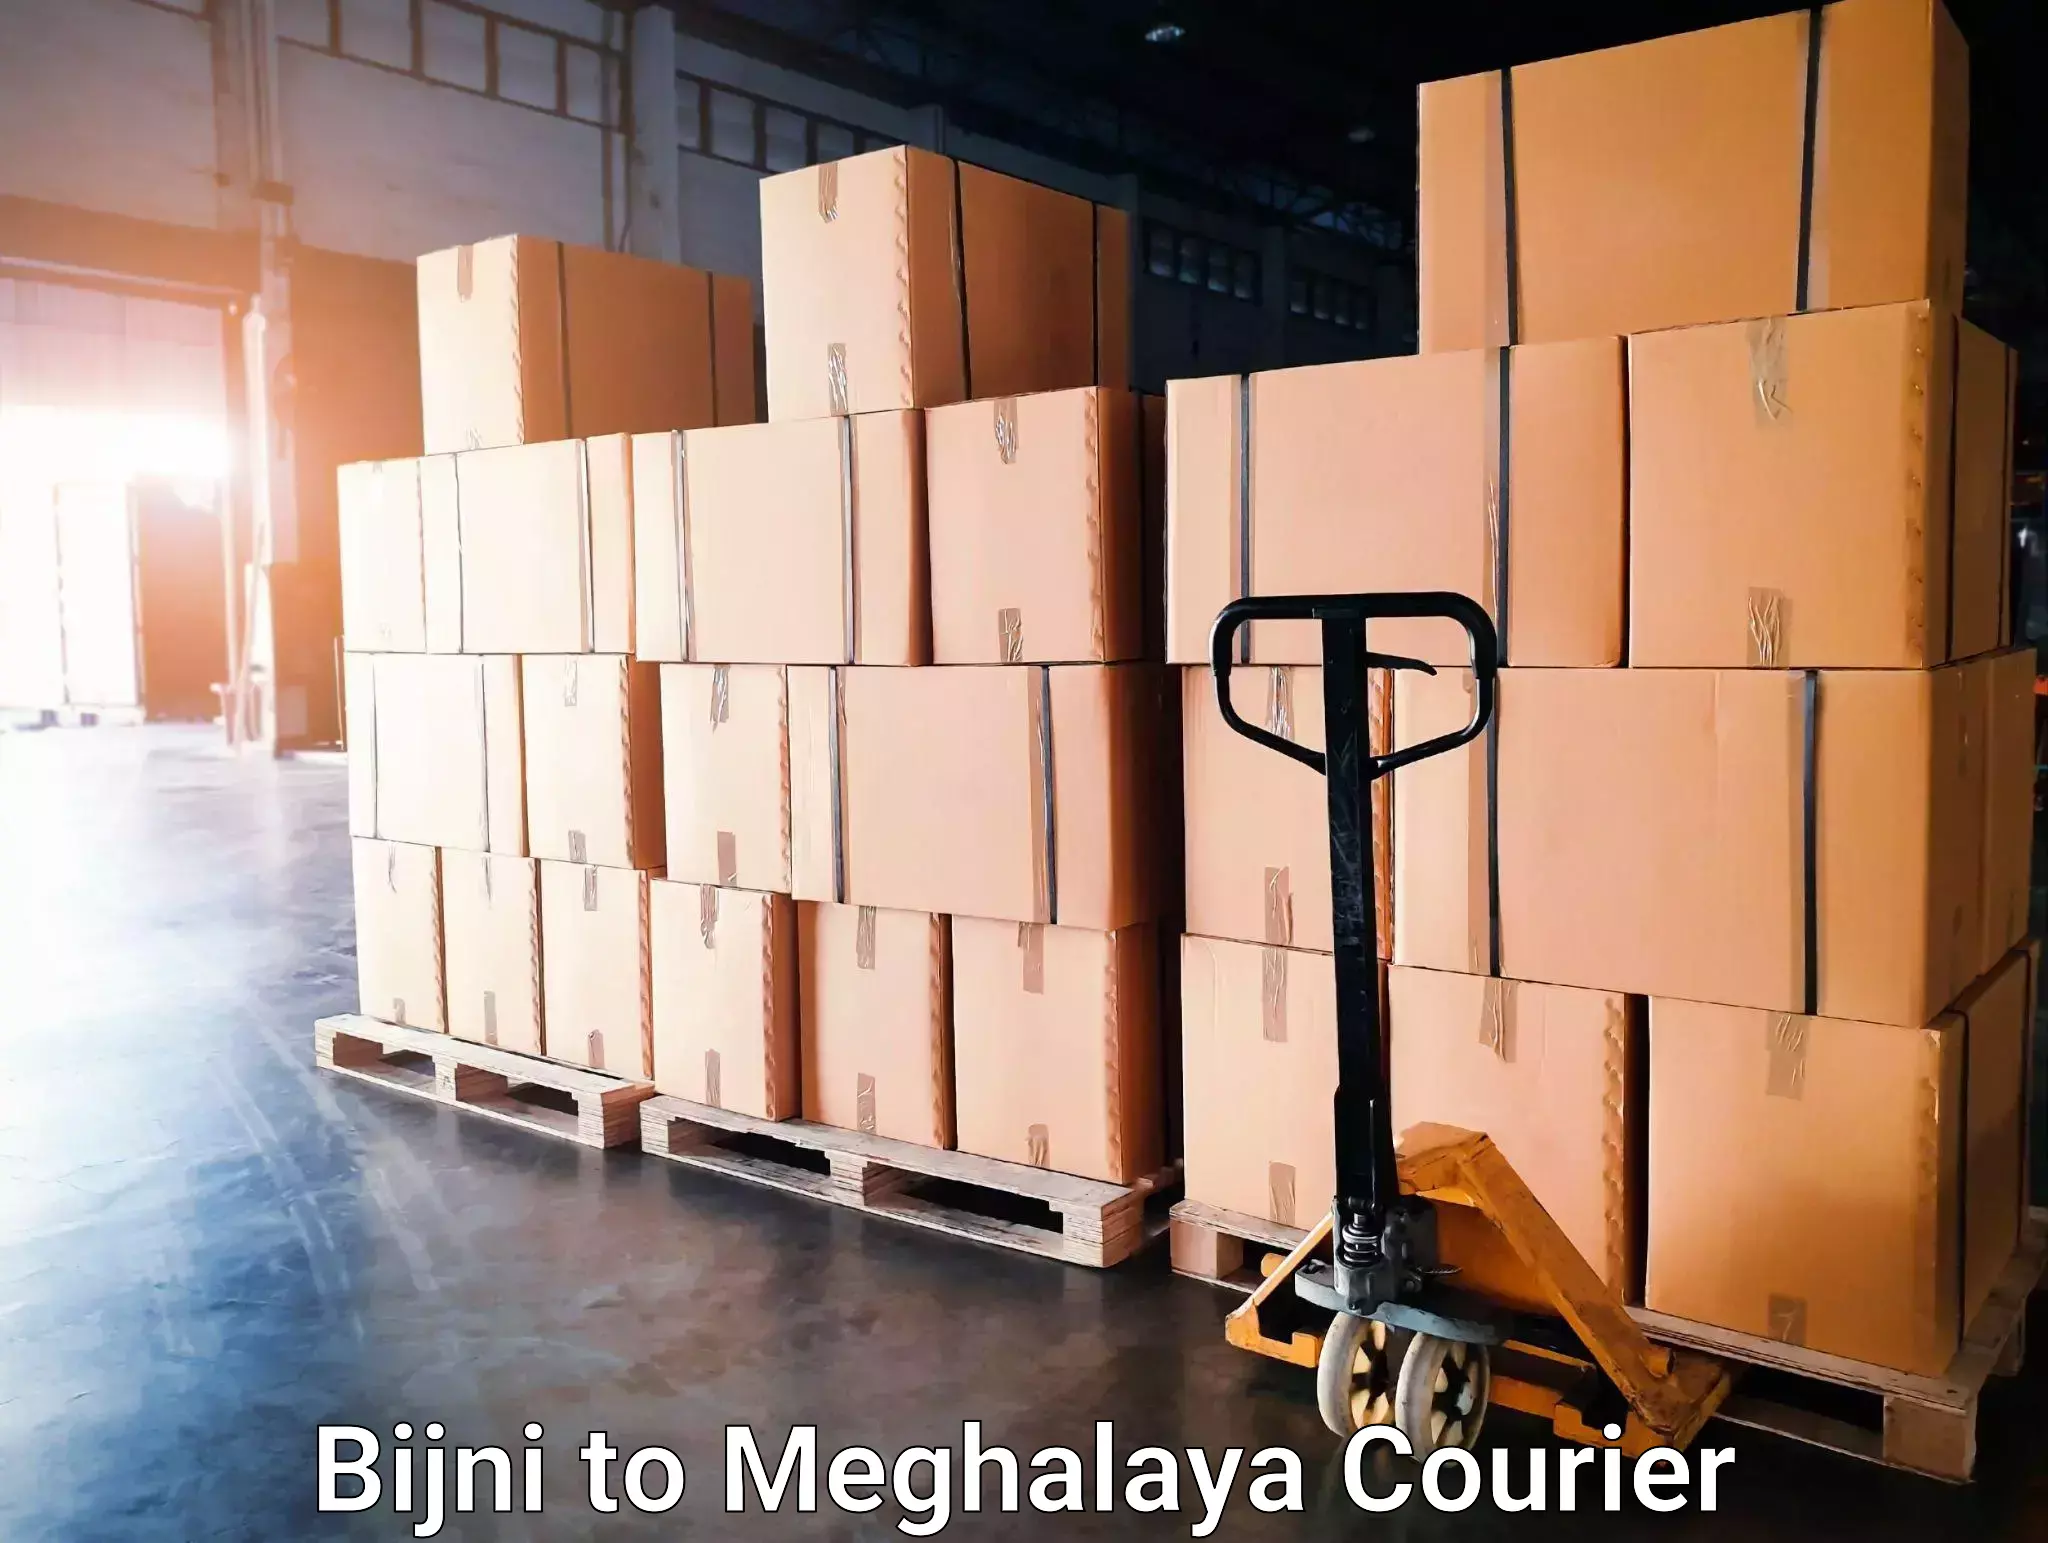 Customer-oriented courier services in Bijni to Shillong